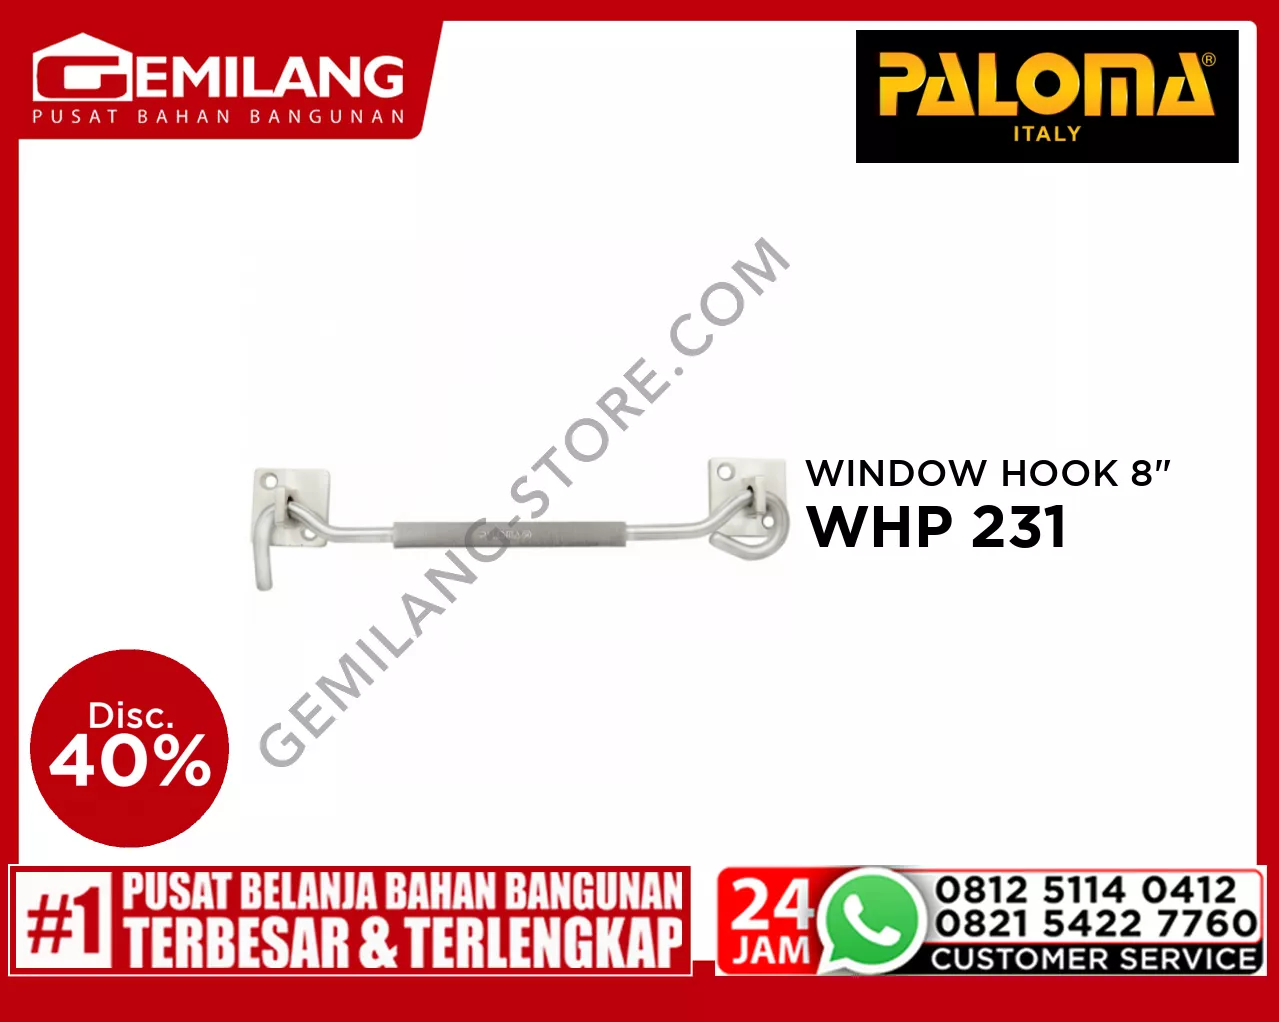 PALOMA WINDOW HOOK STAINLESS STEEL PALOMA 204 8inch SG4 SSS WHP 231